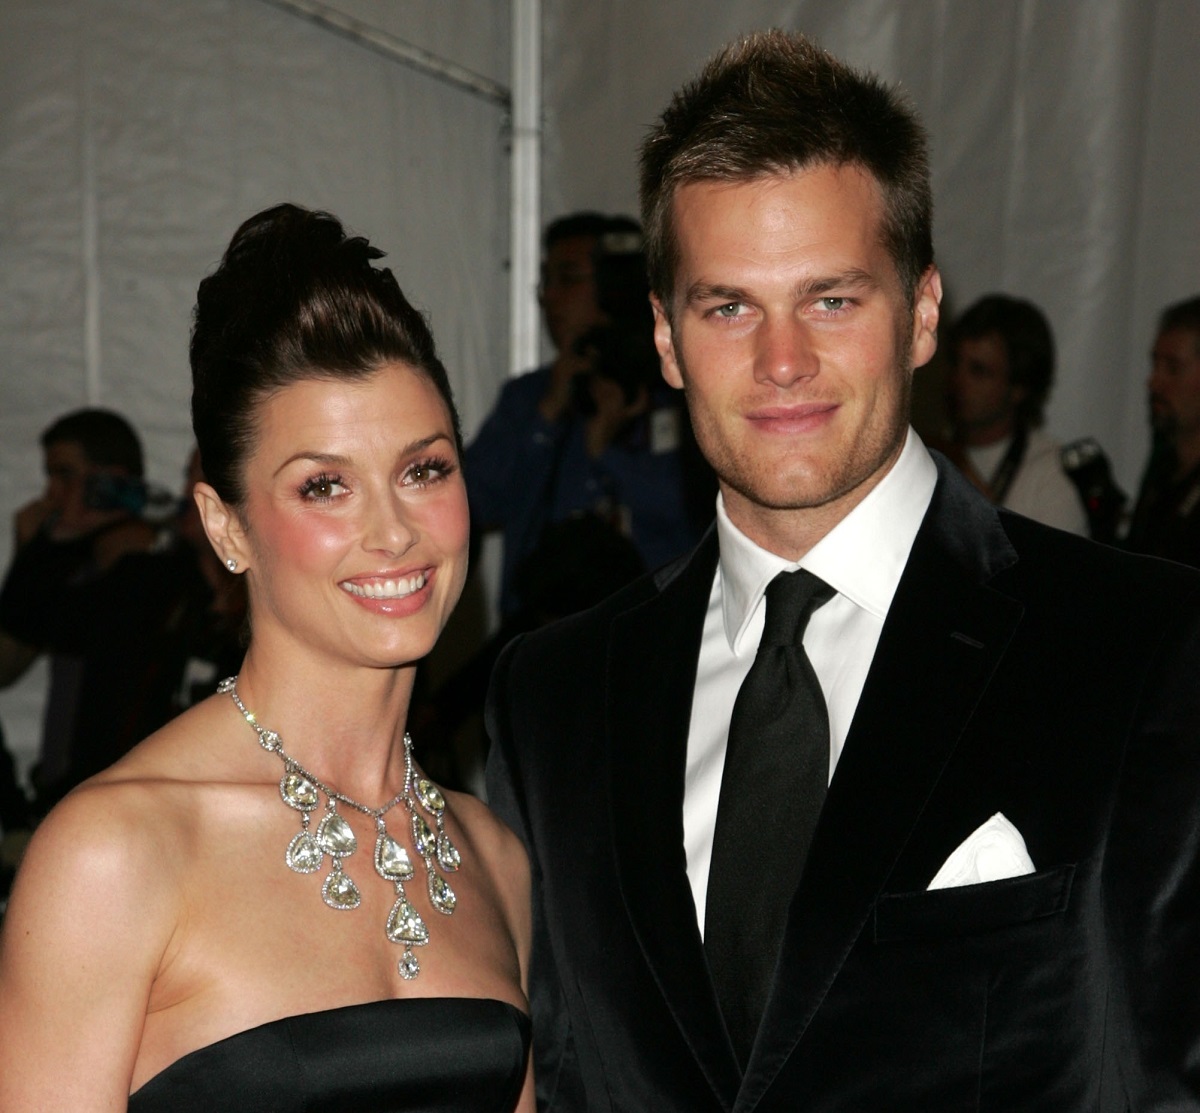 Bridget Moynahan and Tom Brady at the Met Gala together in 2006